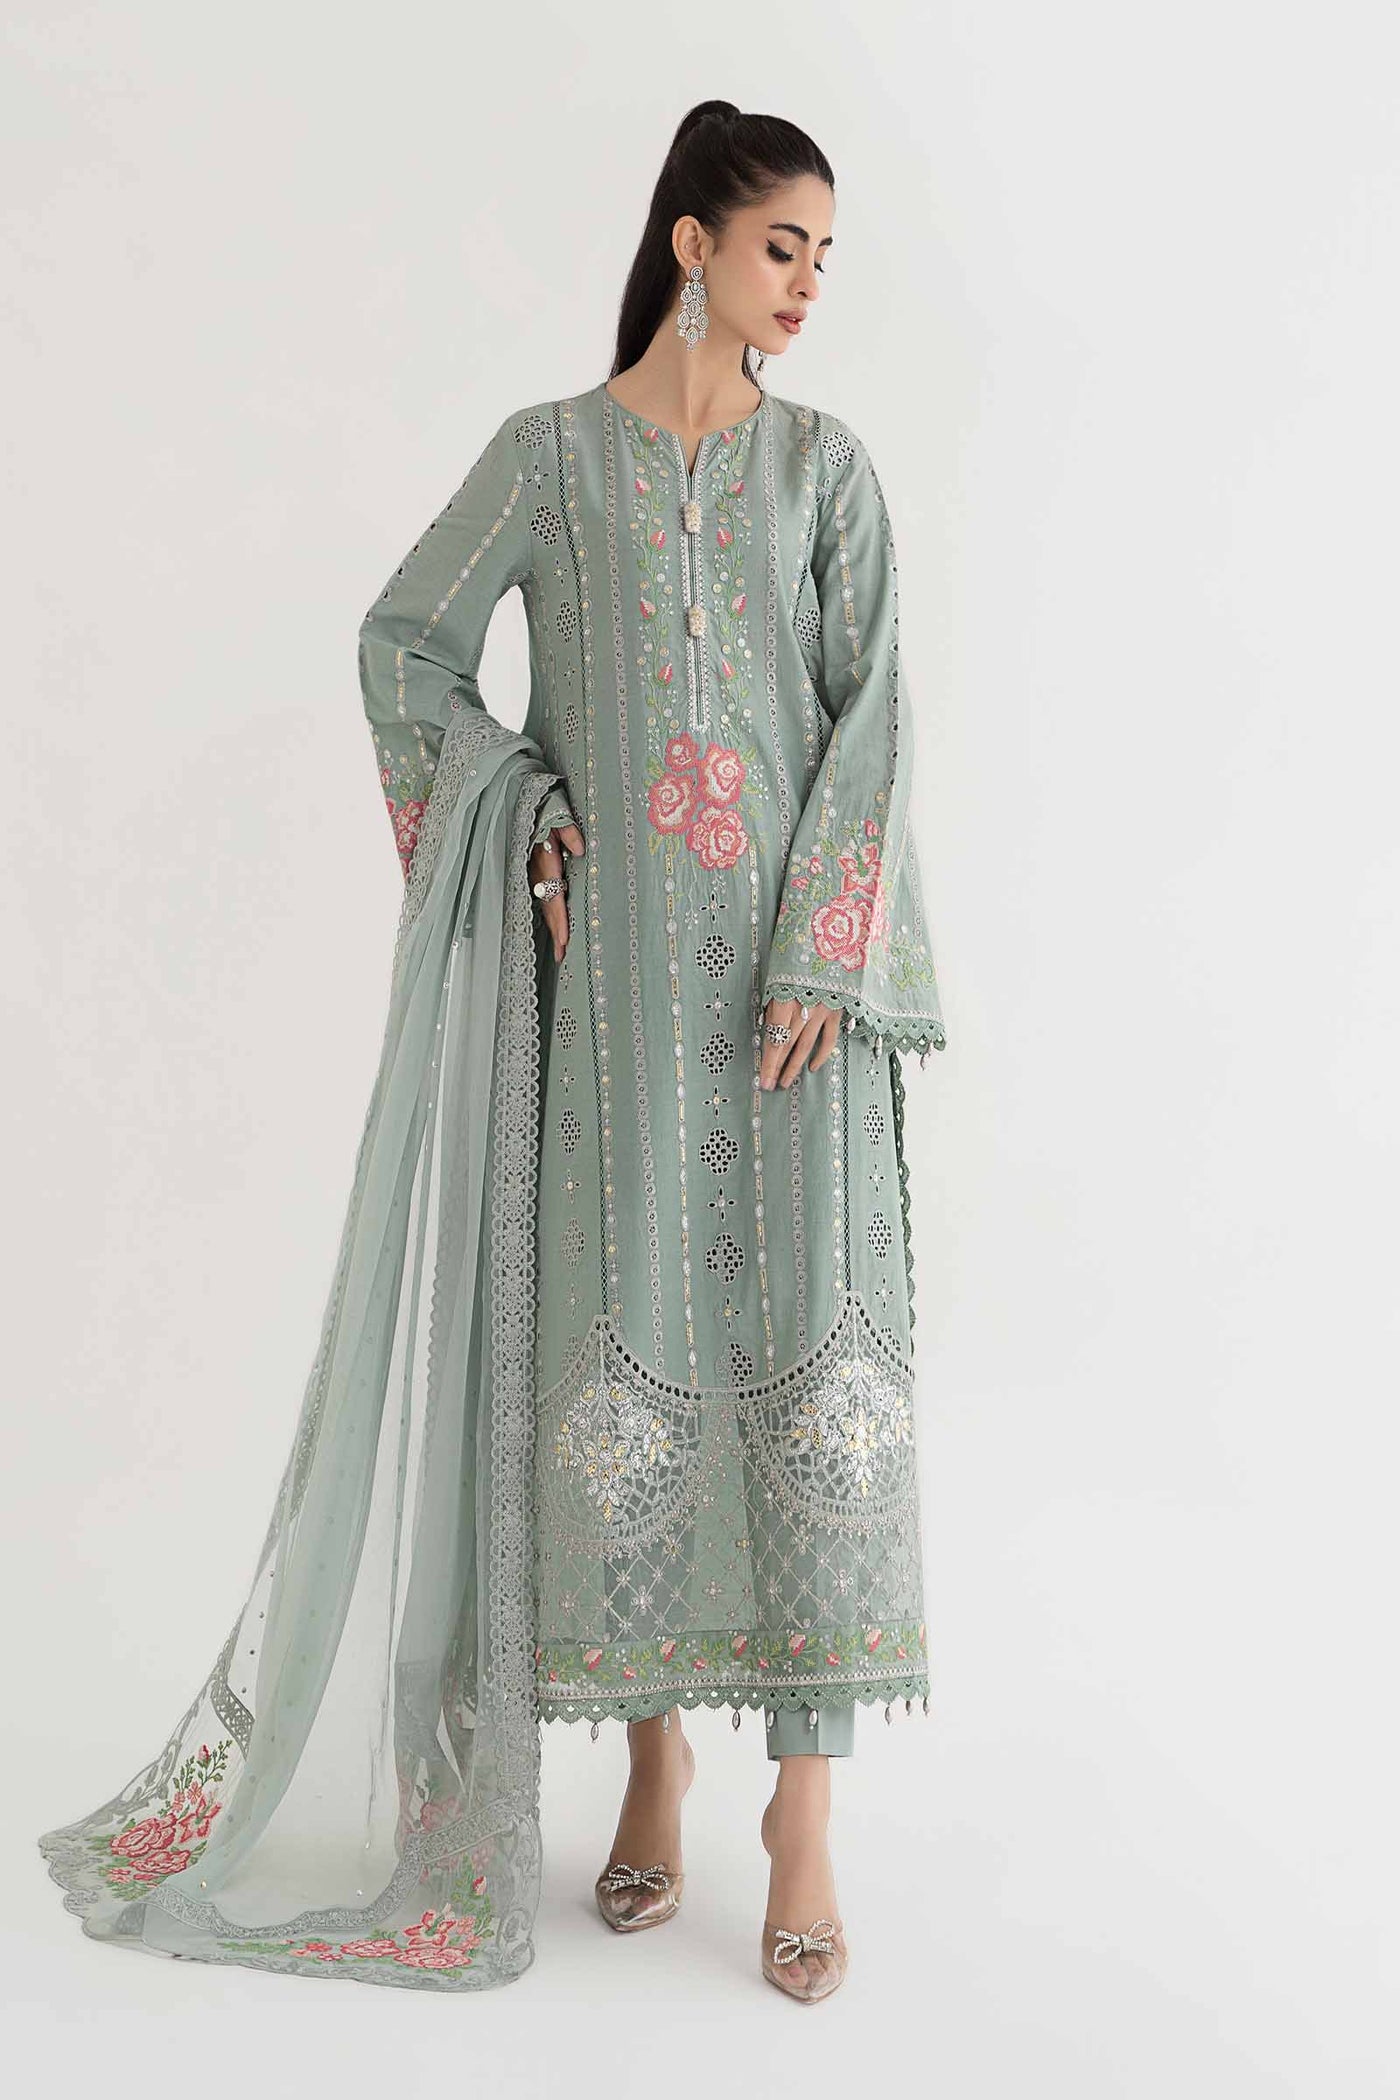 3 PIECE EMBROIDERED LAWN SUIT | DS-2412-B